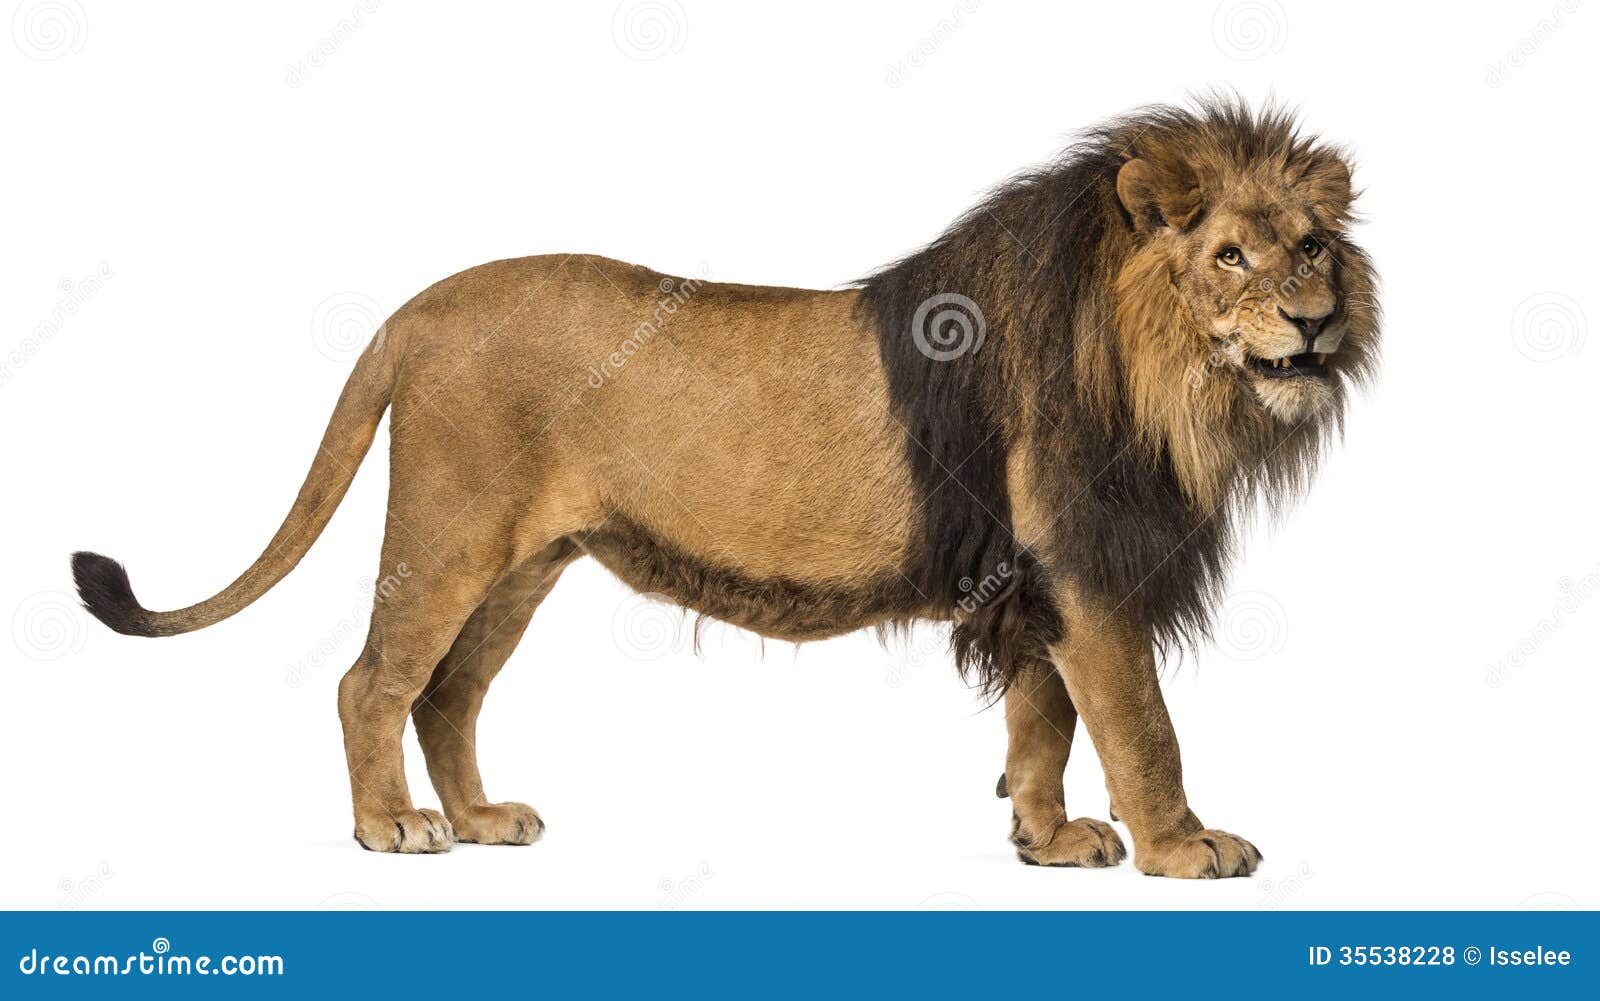 http://thumbs.dreamstime.com/z/close-up-lion-roaring-panthera-leo-years-old-isolated-white-35538228.jpg